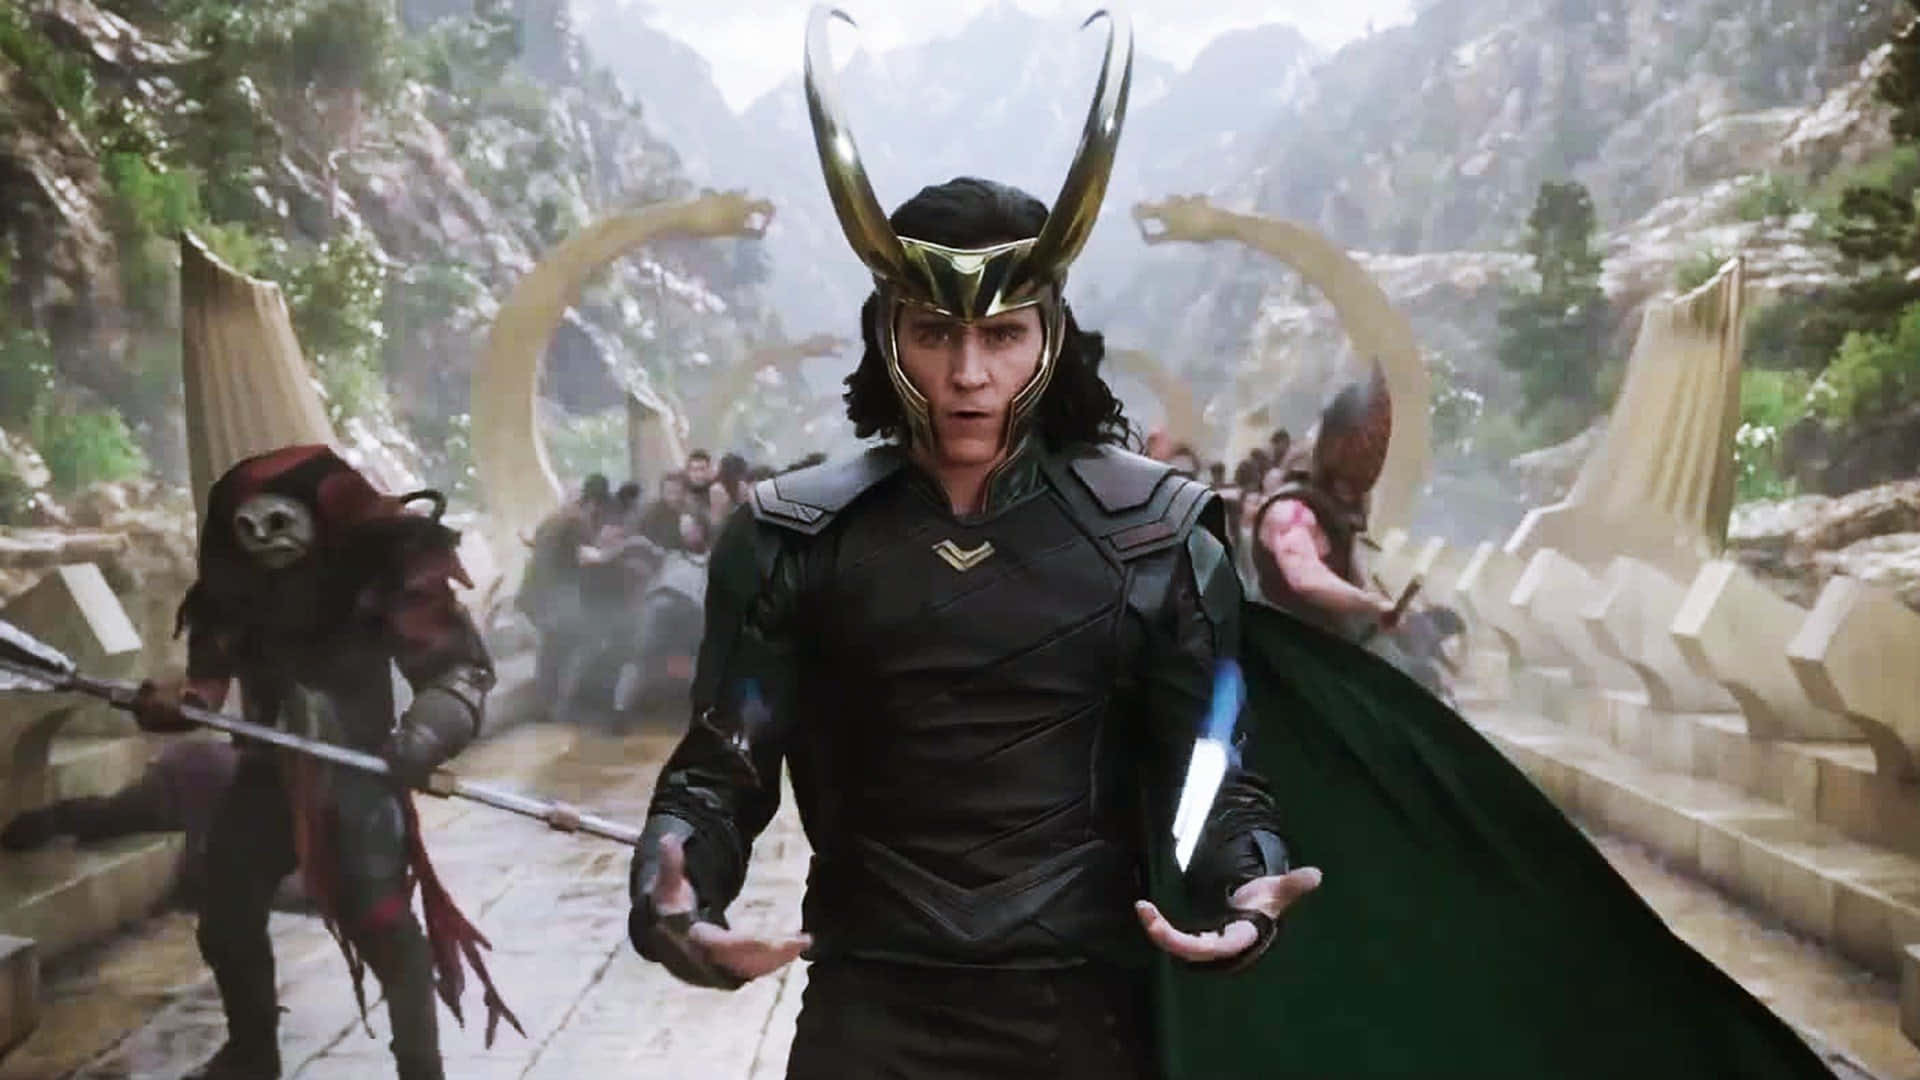 Caption: The Cunning God of Mischief, Loki, in a Defiant Pose